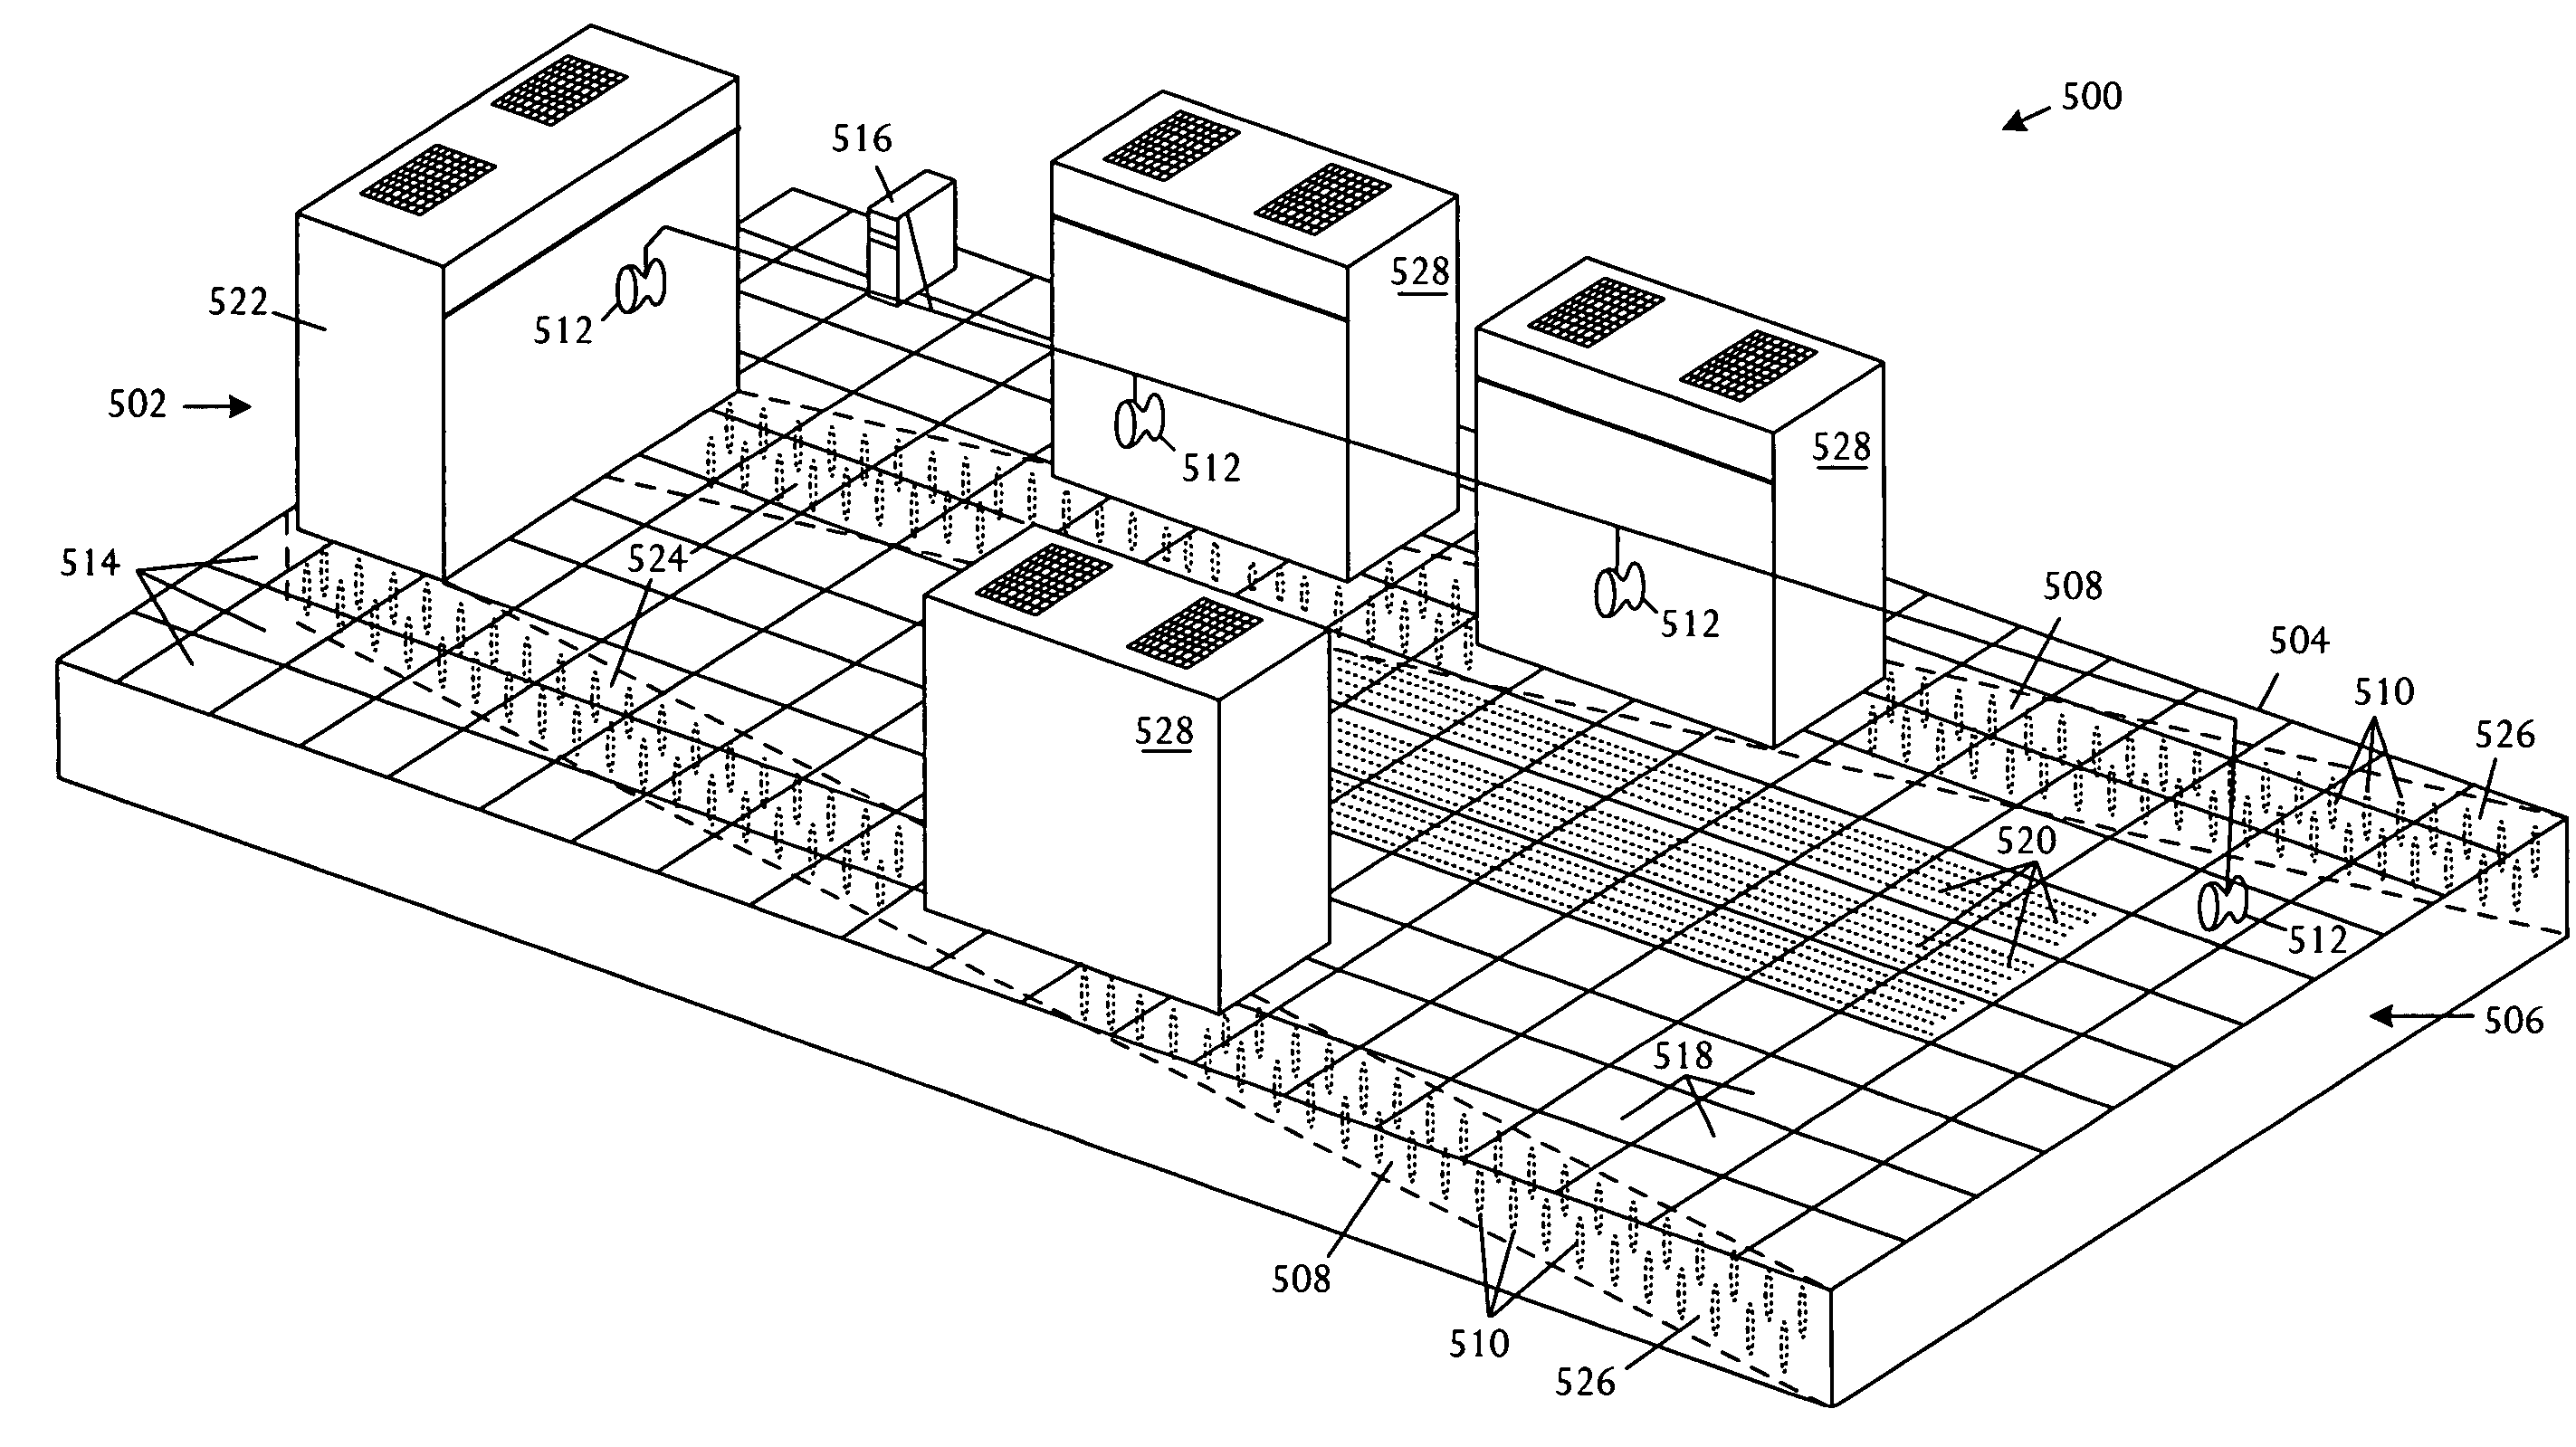 Airflow distribution control system for usage in a raised-floor data center